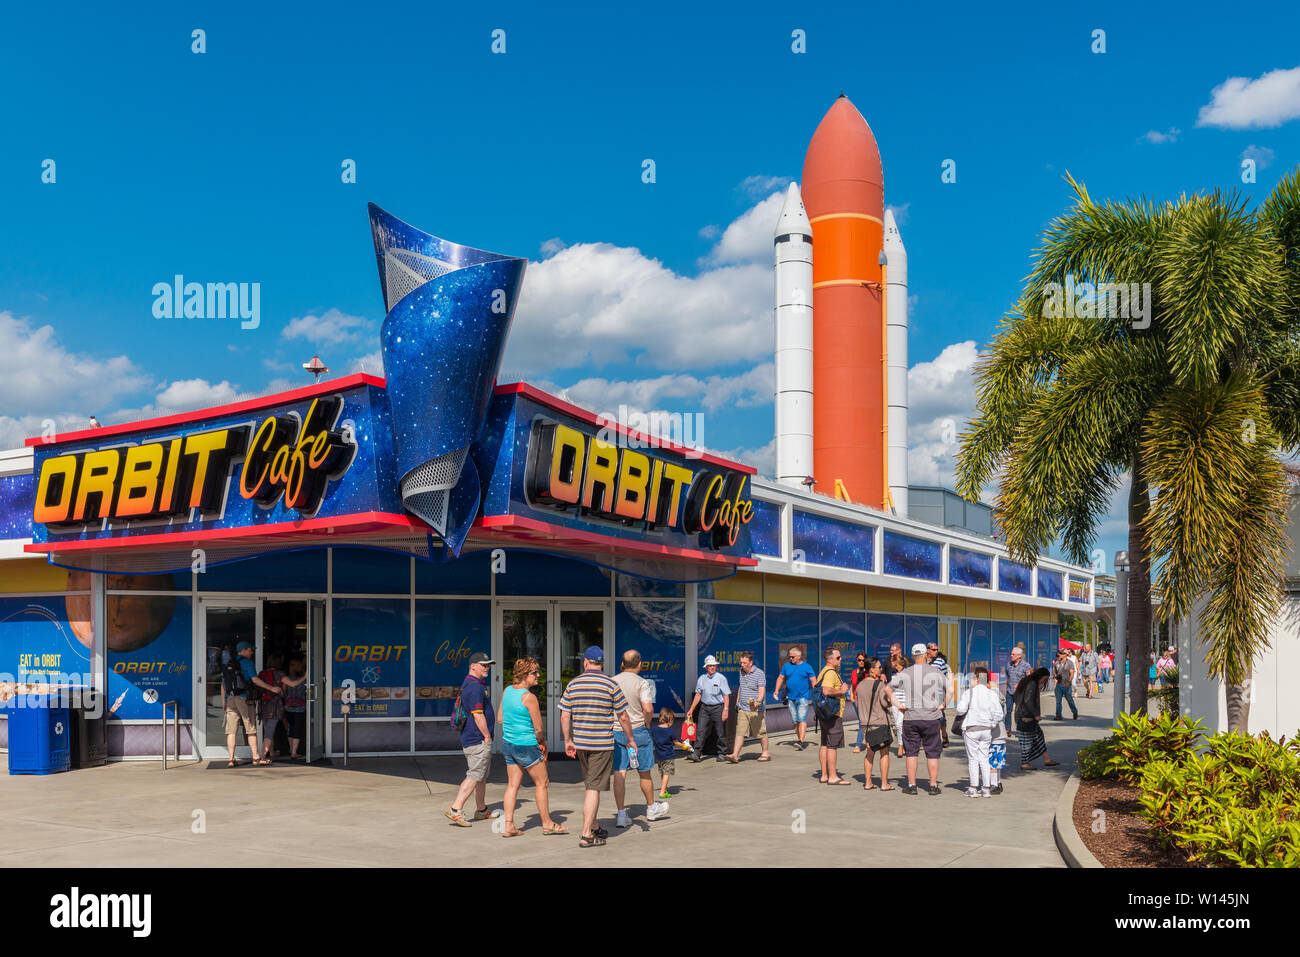 Orbit Cafe and Atlantis Space Shuttle at Kennedy Space Center Visitor Complex in Cape Canaveral, Florida, USA Stock Photo